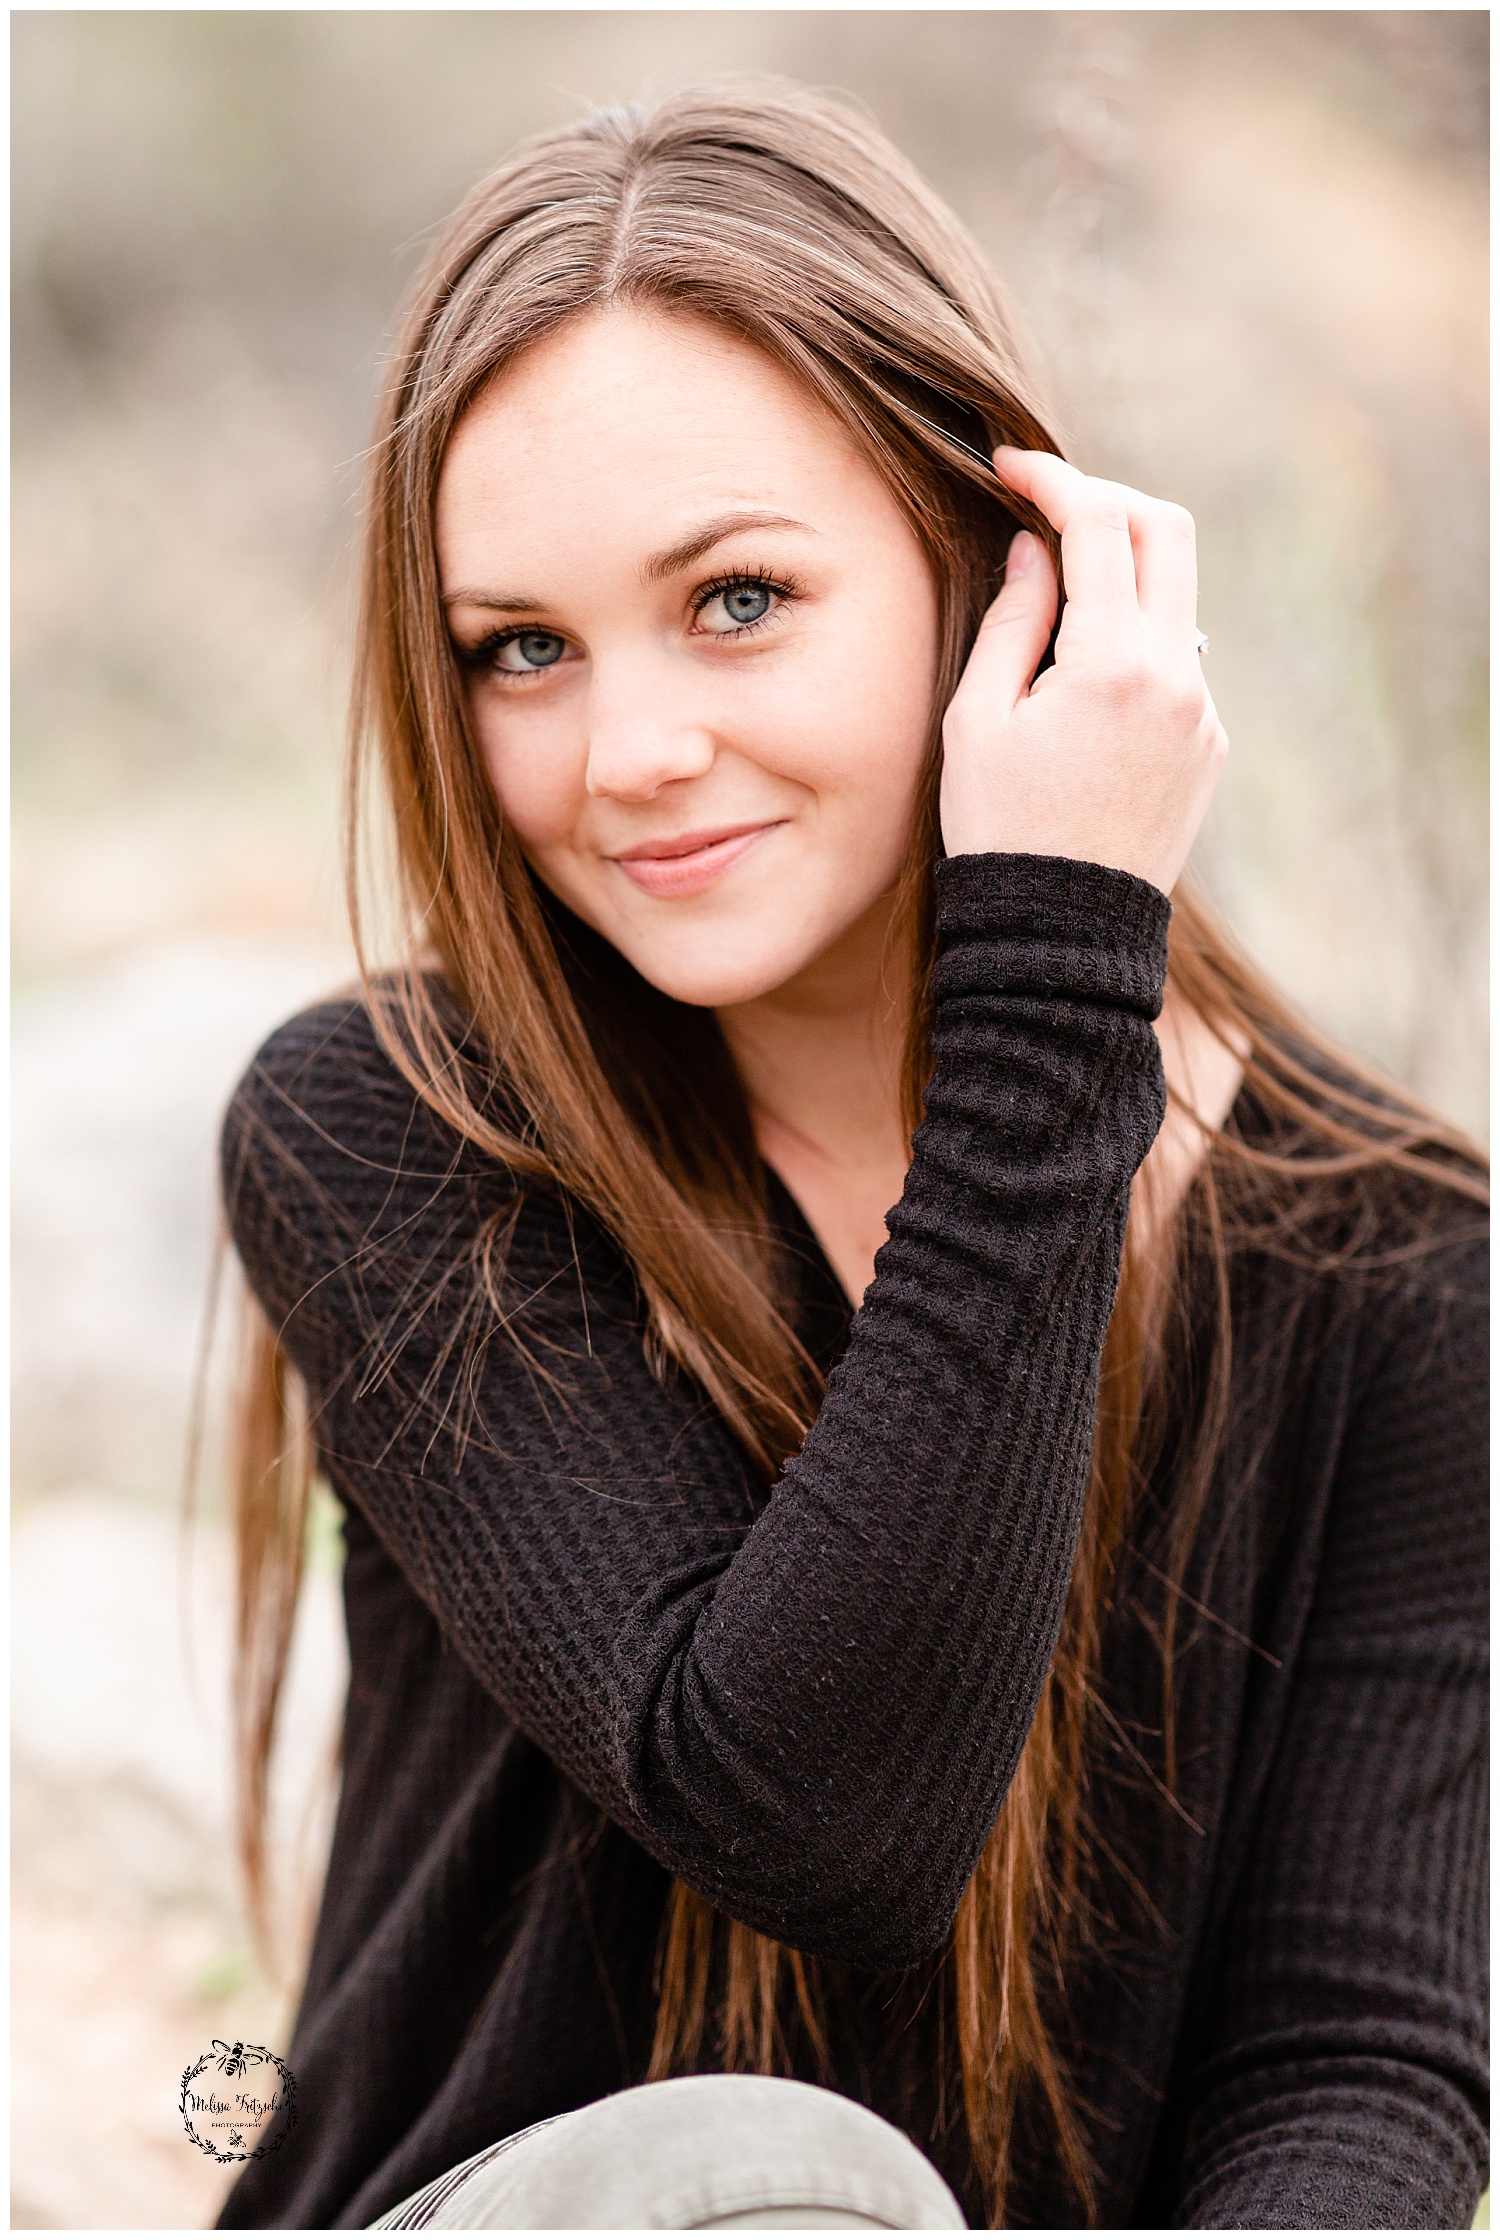 Tucon Senior Session taken at Honey Bee Canyon by Melissa Fritzsche Photography